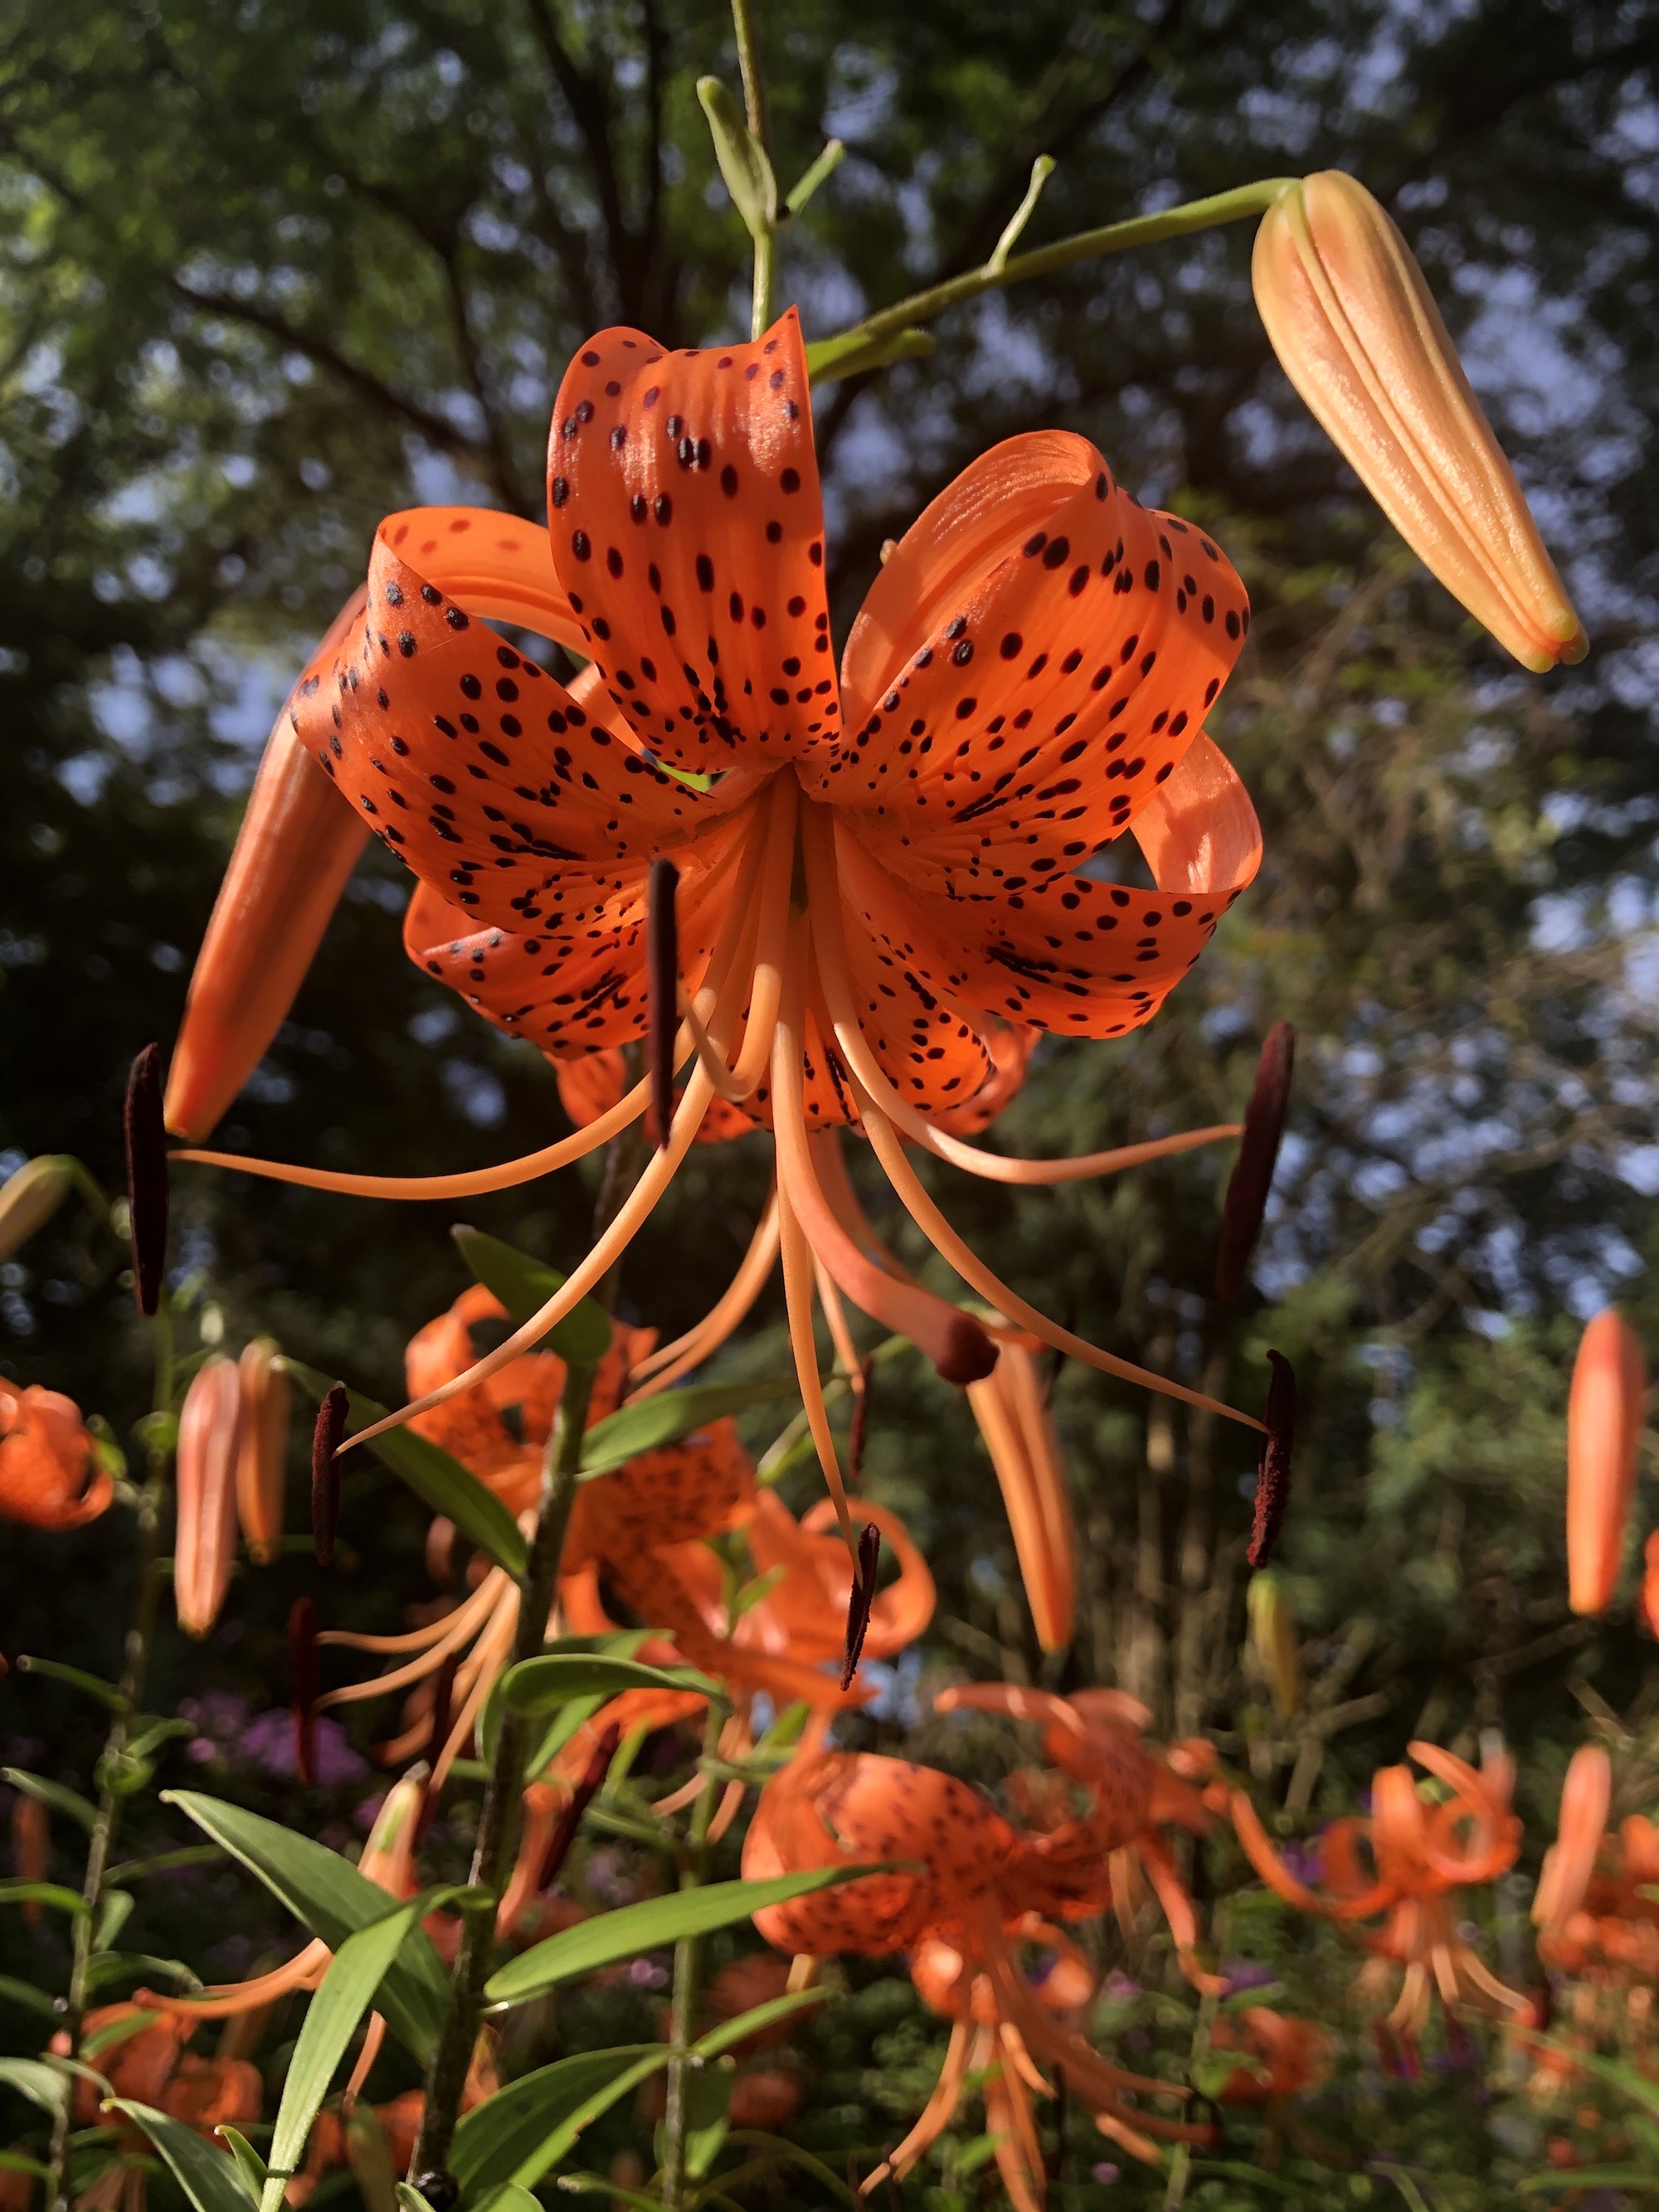 Tiger Lily near the Duck Pond on July 26, 2020.